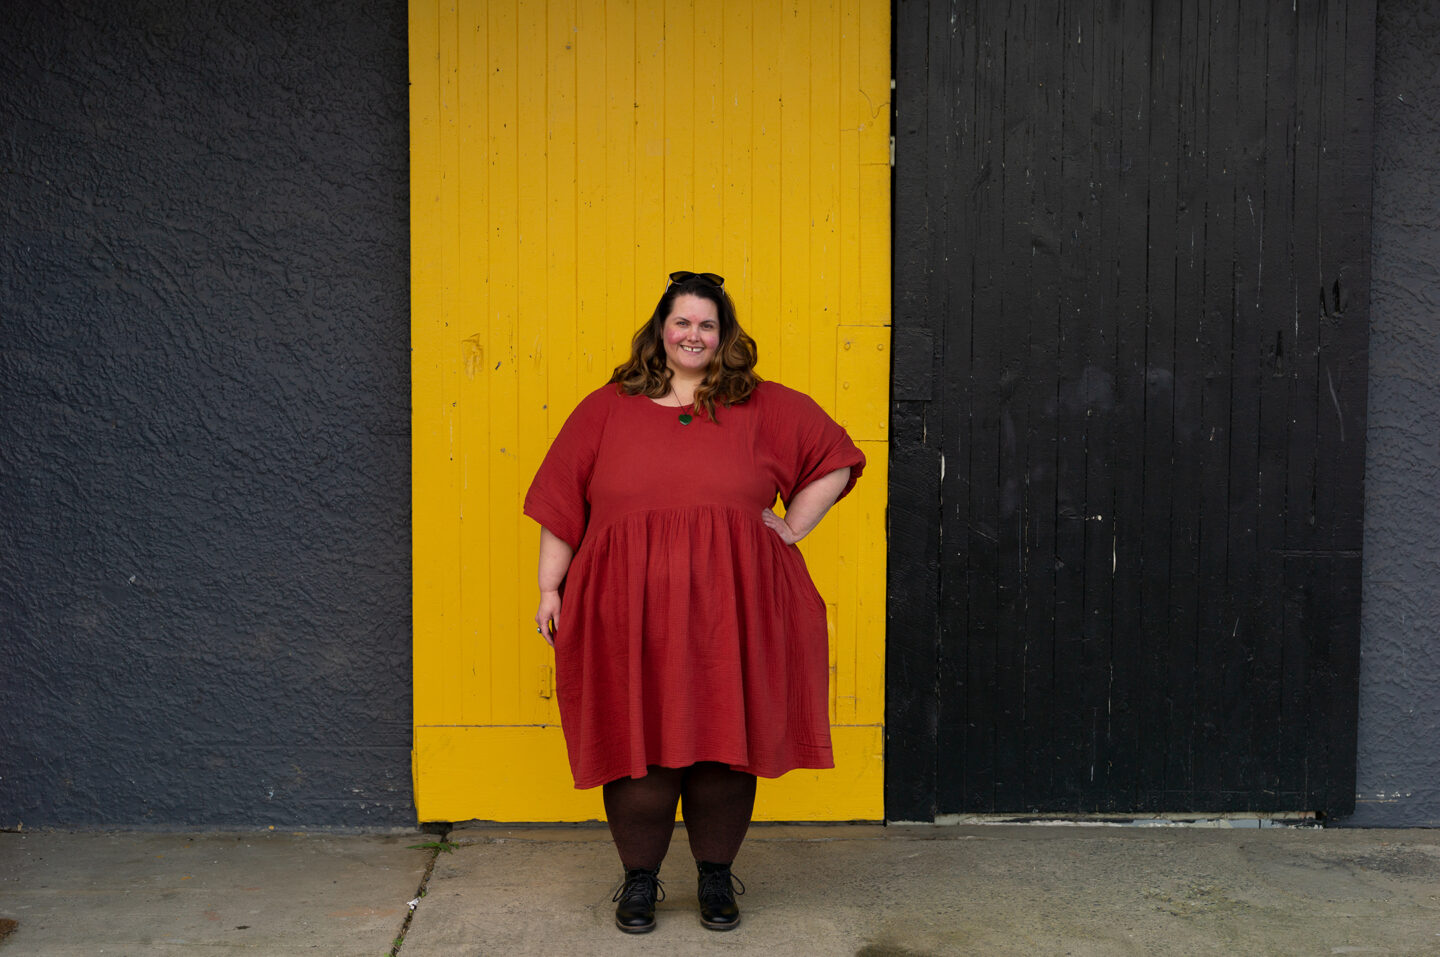 Meagan, a fat Māori woman, stands in front of a yellow door in a black wall. She is wearing a brick red dress with brown marl stockings and black lace up boots.